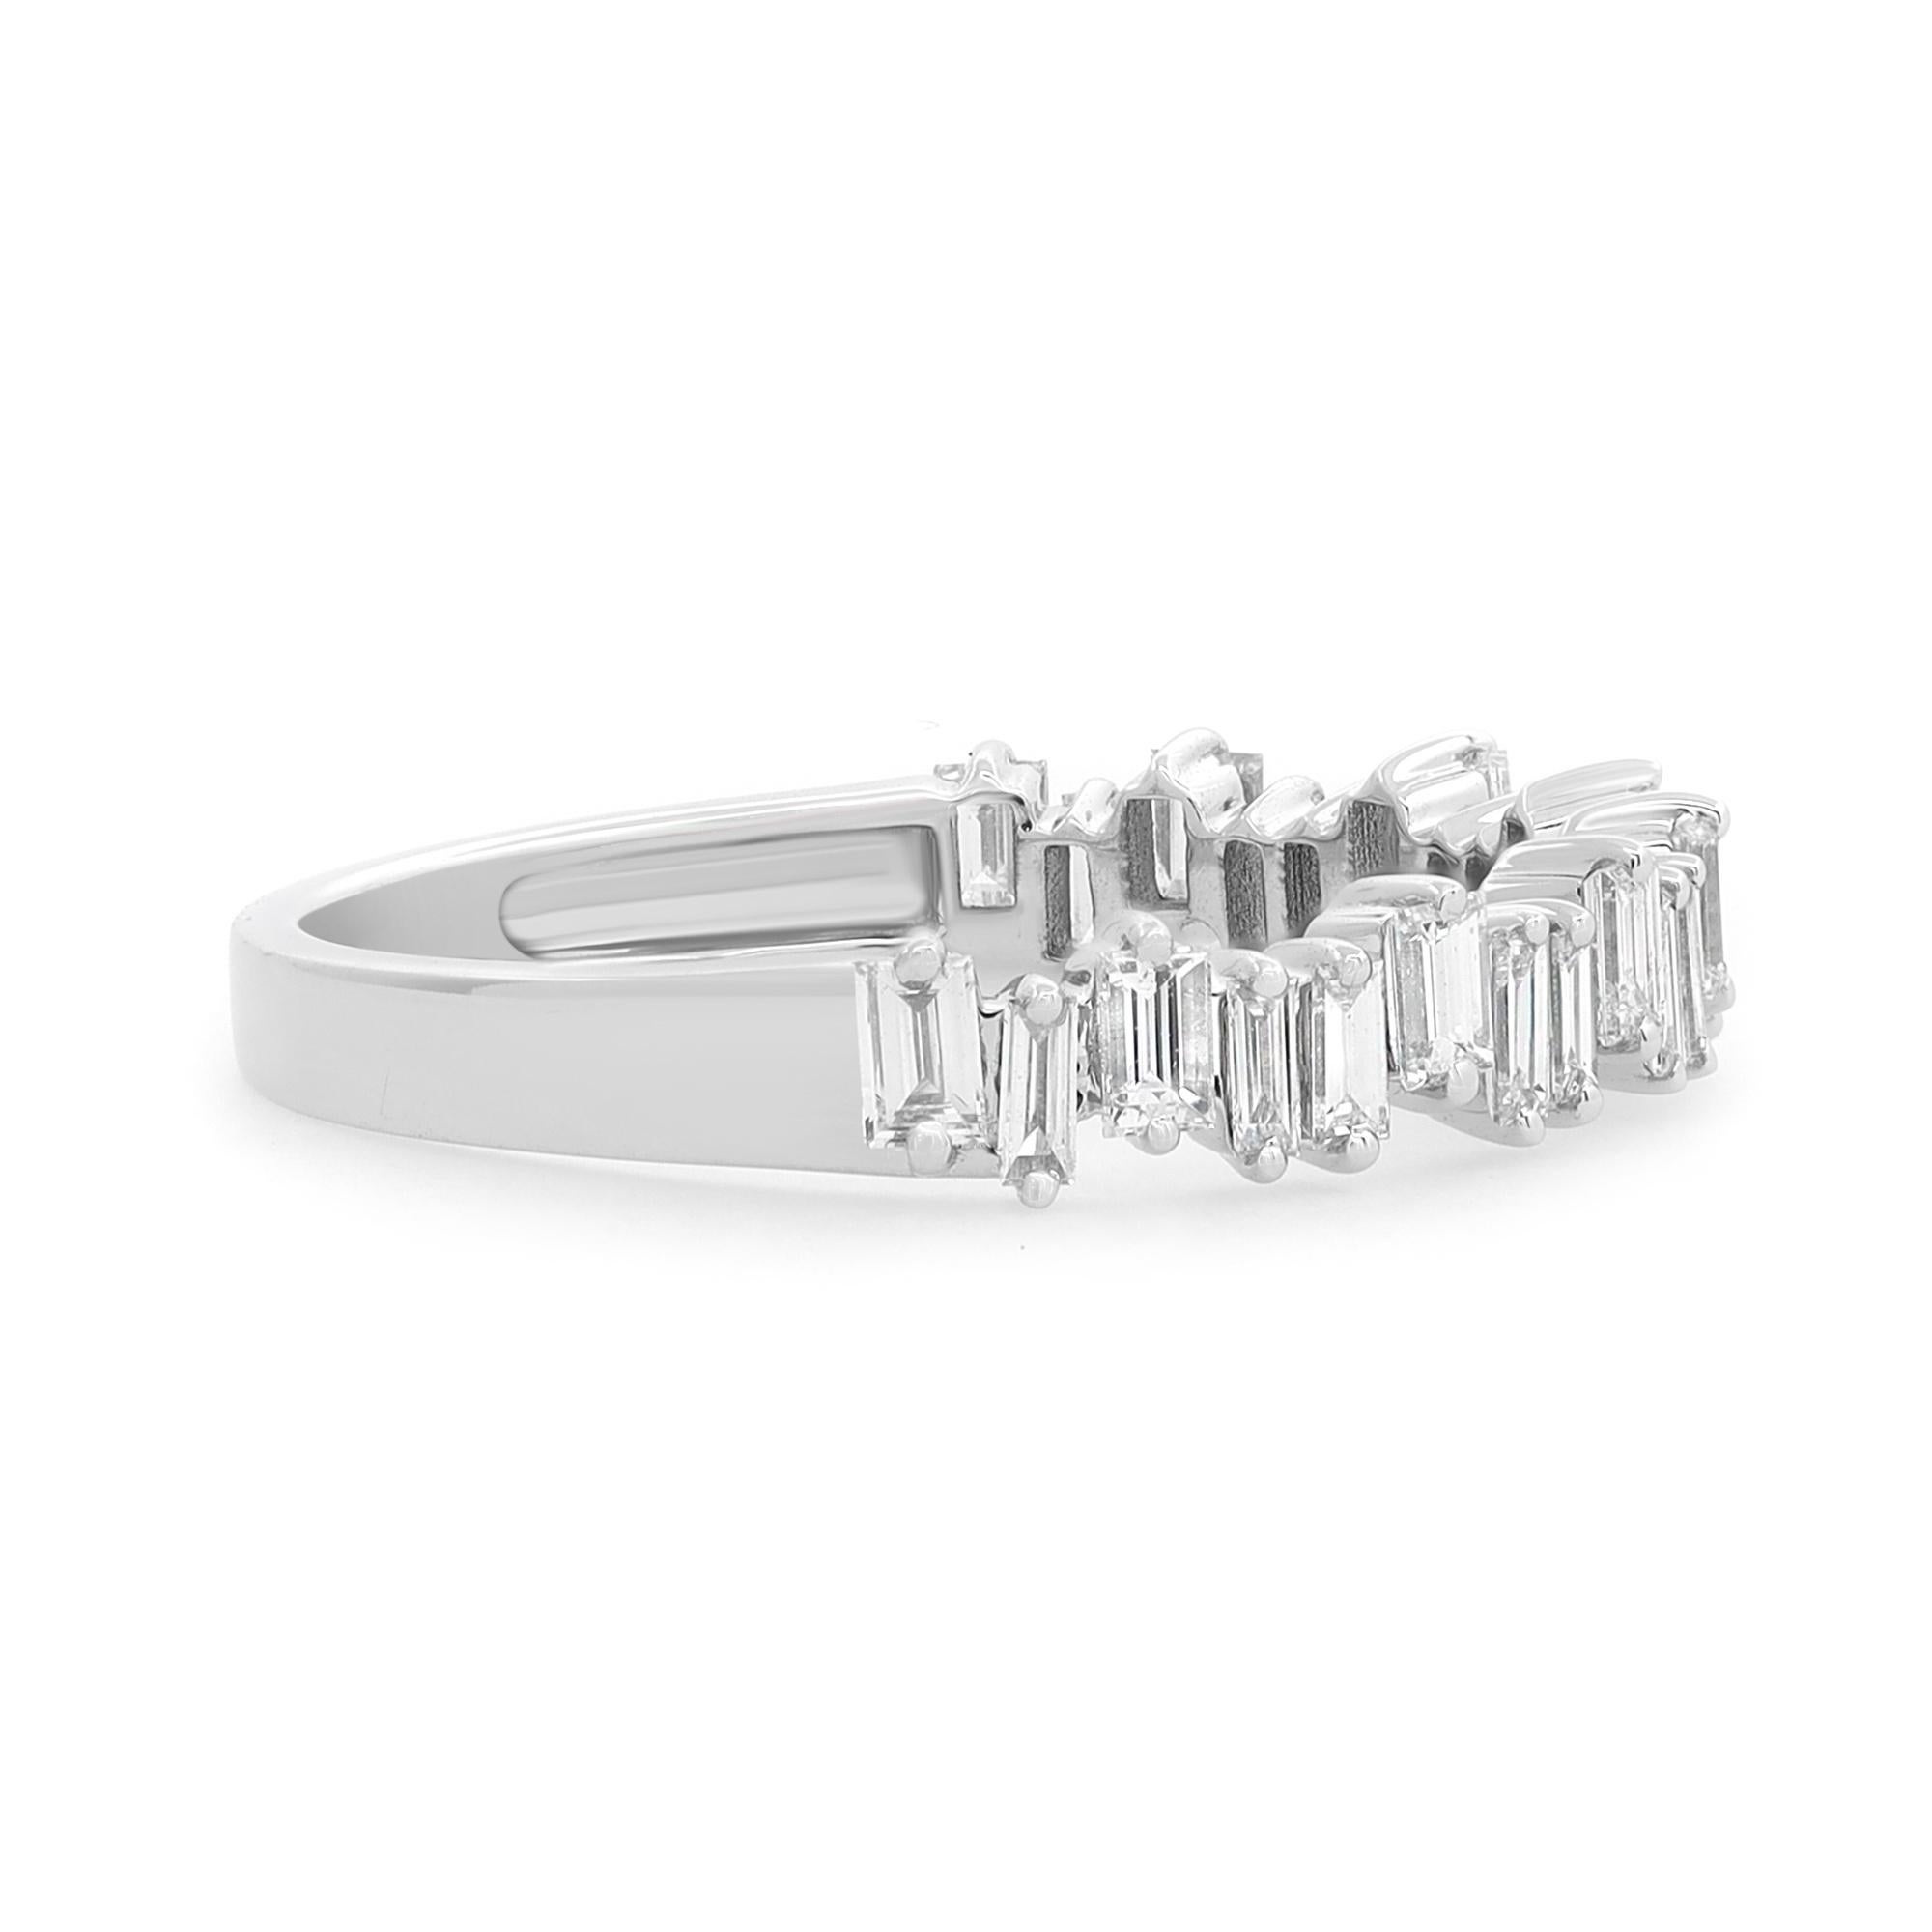 Simple and delicate diamond ring crafted in 18k white gold. This ring features prong set baguette cut diamonds set in a zig-zag pattern portraying a timeless, eye-catching style. It's stackable and easy to mix and match. Diamond carat weight: 0.63.